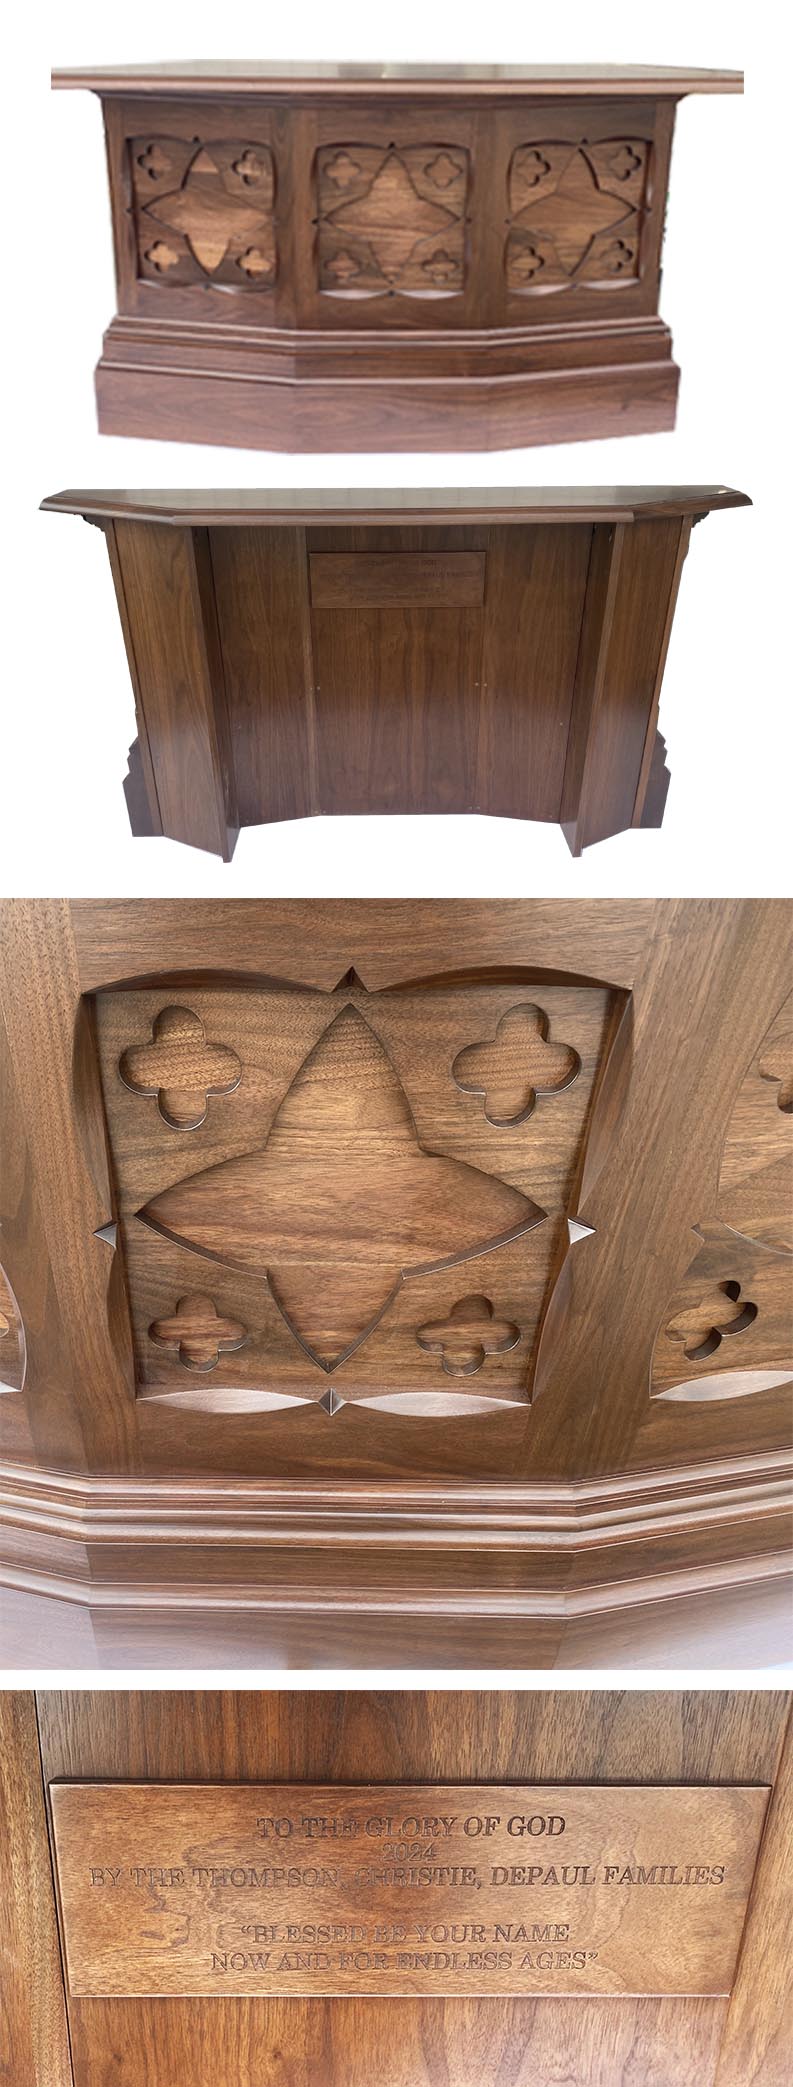 amish woodworking church altar image